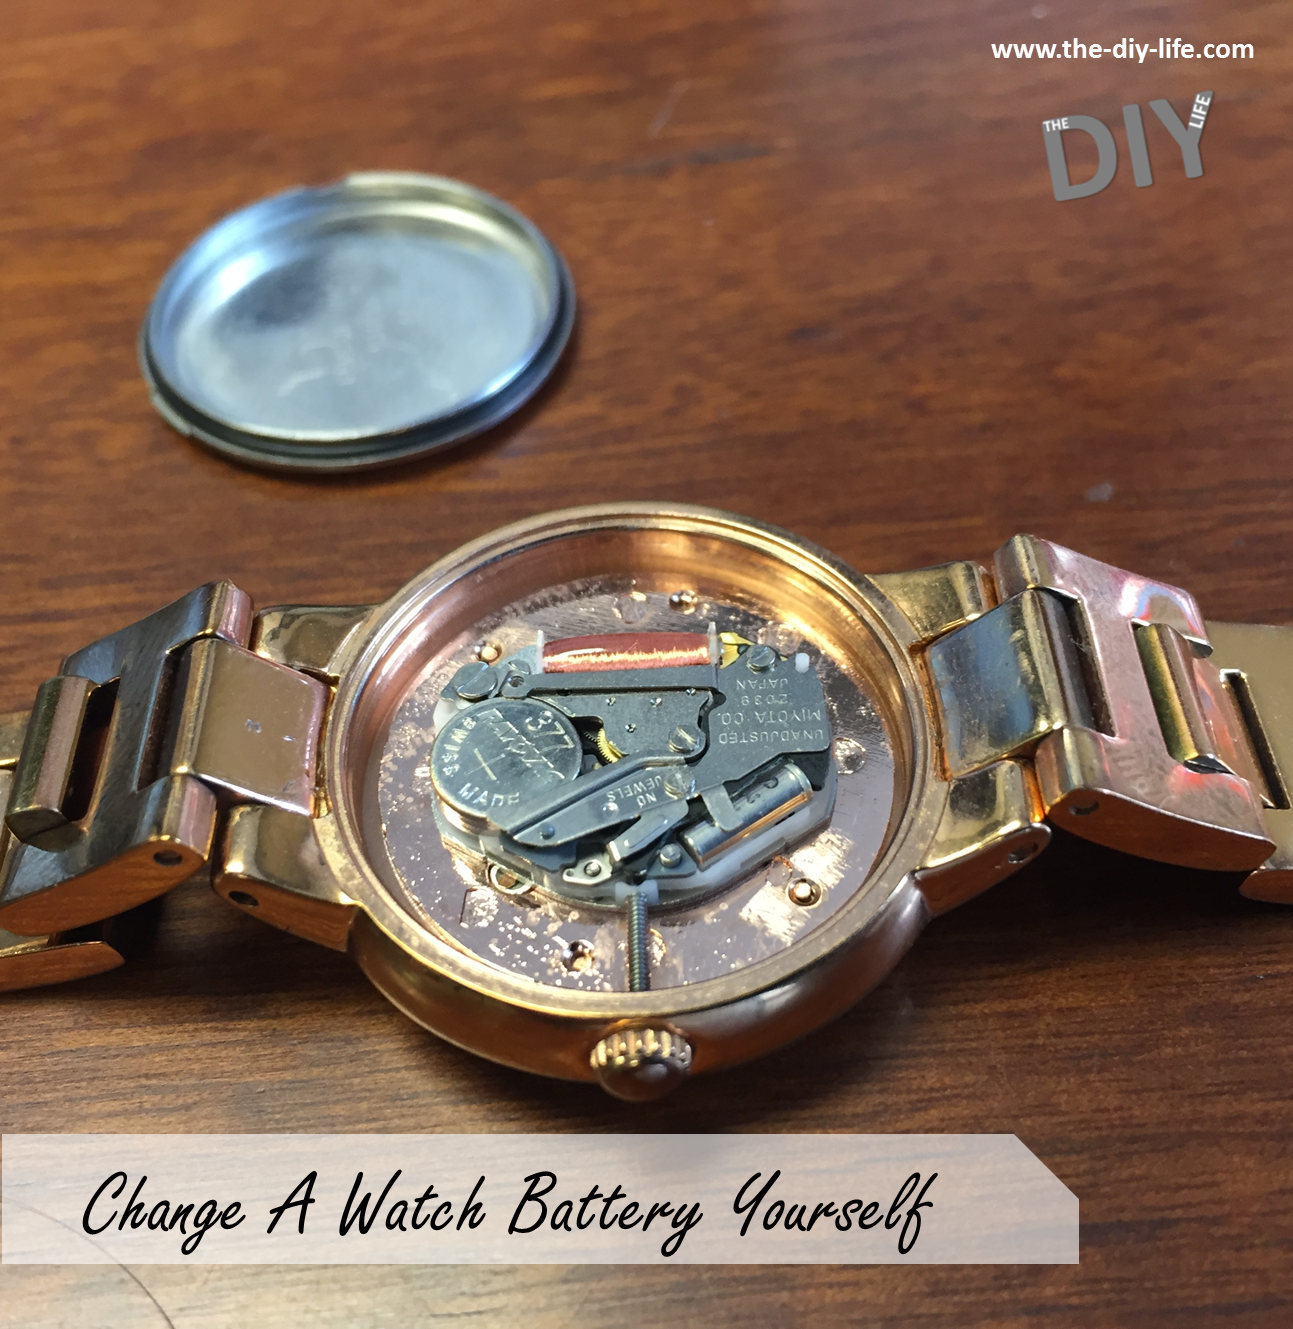 Burberry Watch Battery Replacement Size Cheap Sale, SAVE 55%.